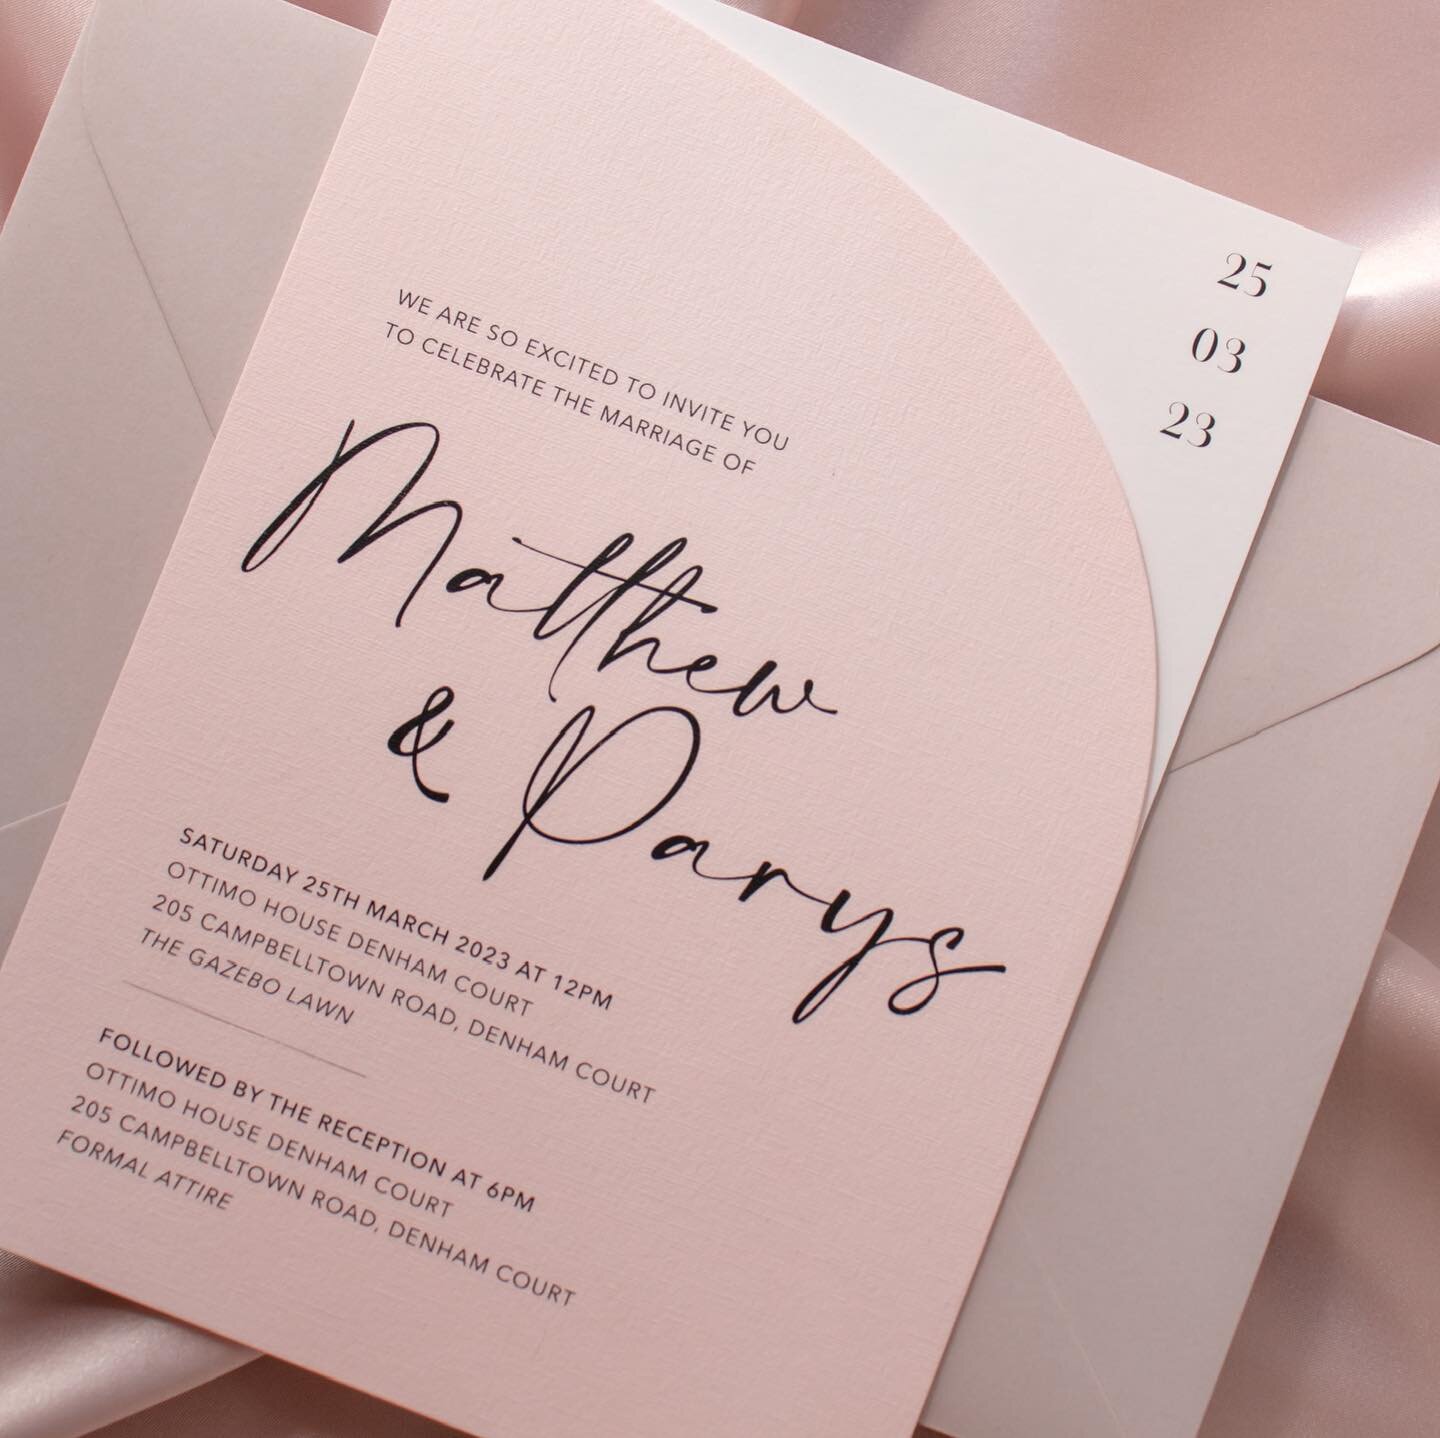 M &amp; P 💍 

Drawing inspiration from this couples unique style, we crafted one-of-a-kind invitiations that captured the essence of their special day. Let us help you create an invitation that reflects your unique love story 🤍